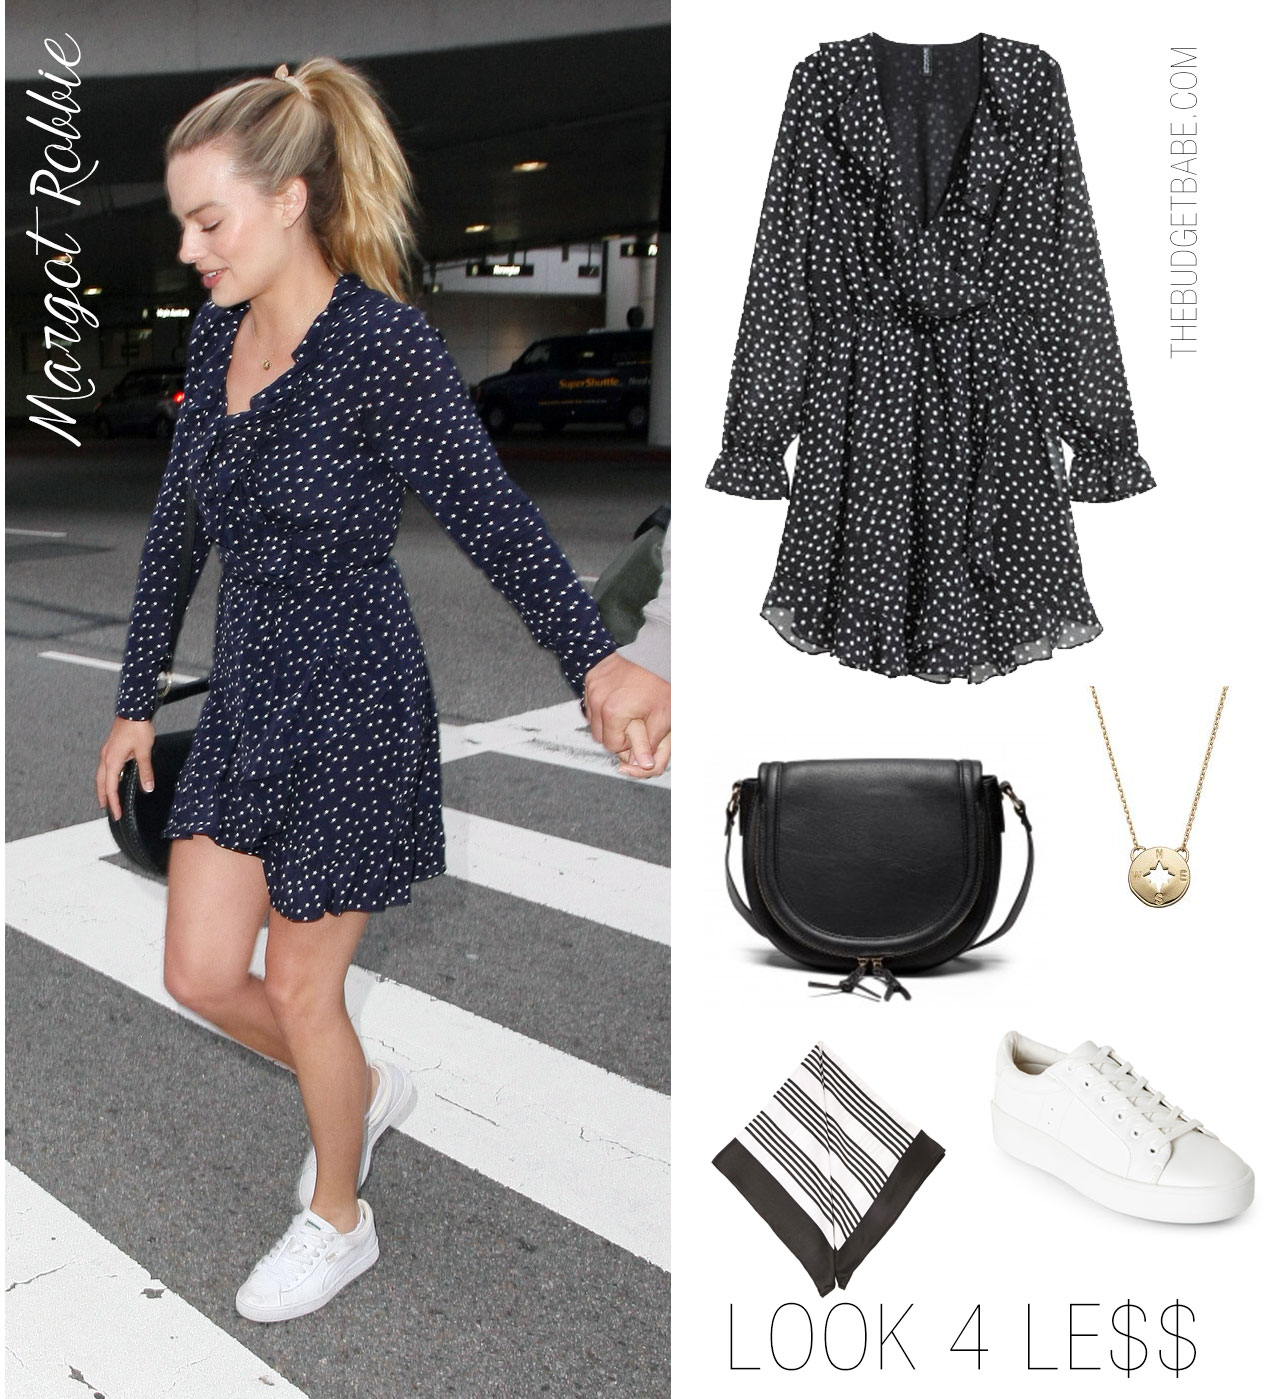 Margot Robbie looks chic in a retro-minded polka dot dress and modern white sneakers.